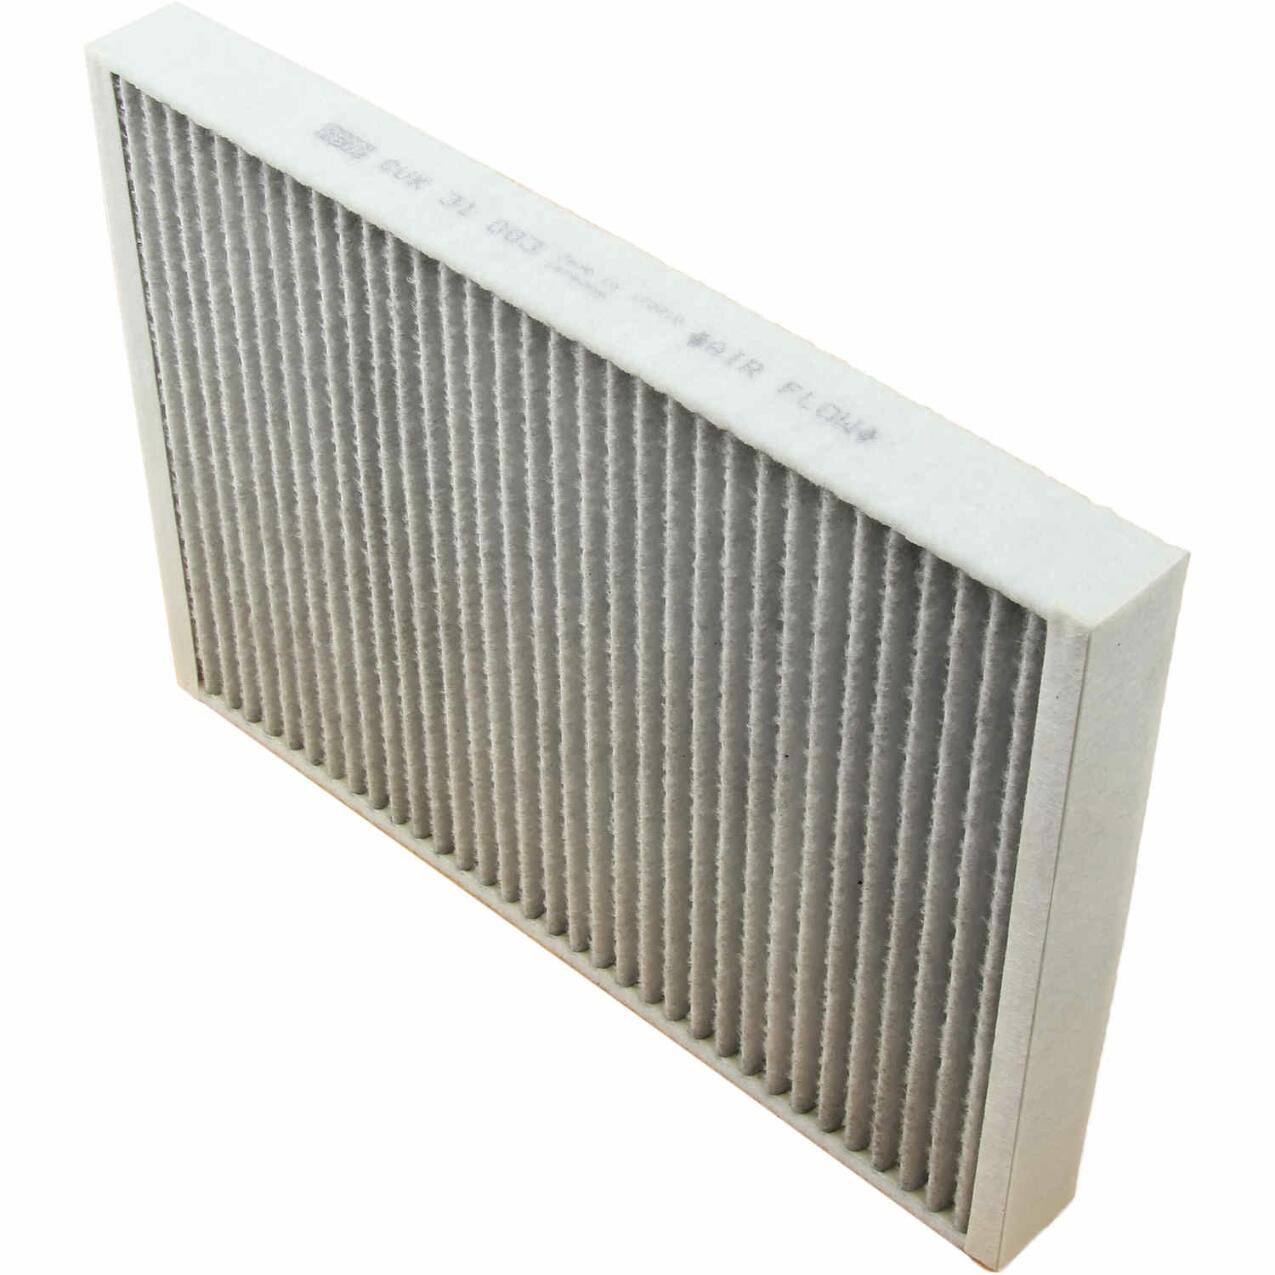 Audi Cabin Air Filter (Activated Charcoal) 4M0819439A - MANN-FILTER CUK31003